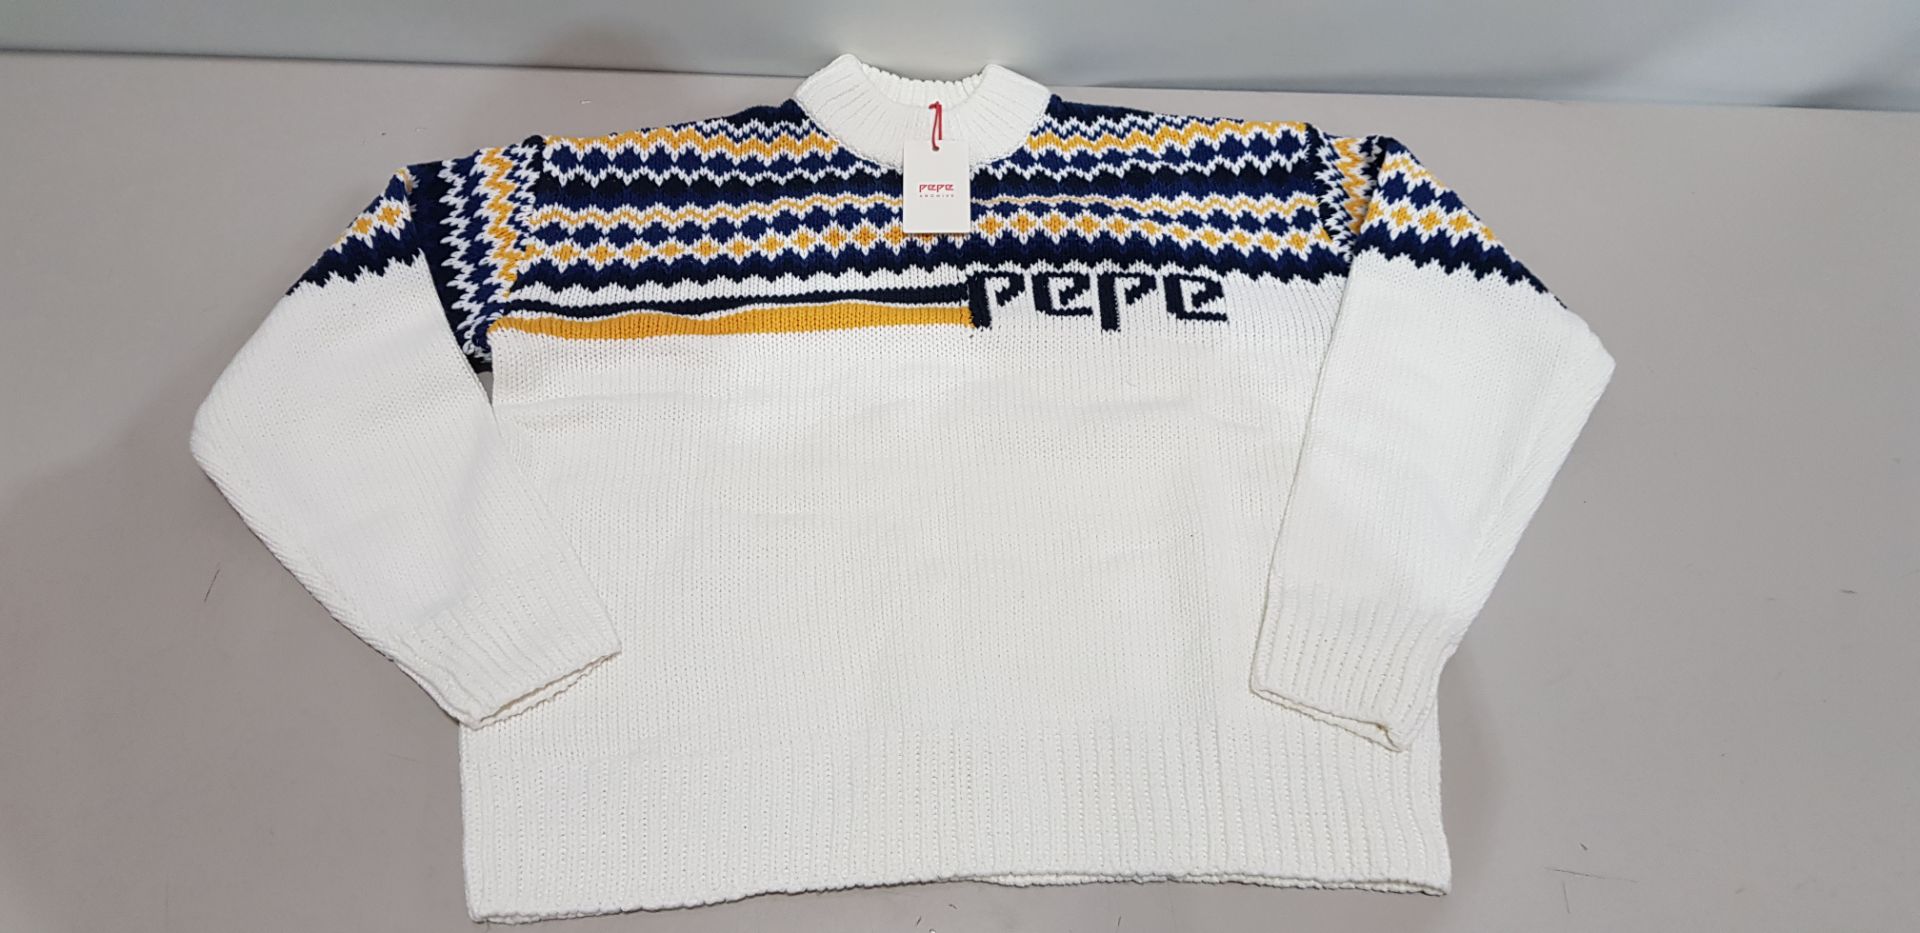 14 X BRAND NEW PEPE JEANS MONIKAS JUMPERS - ALL IN VARIOUS SIZES TO INCLUDE XS/S/M/L